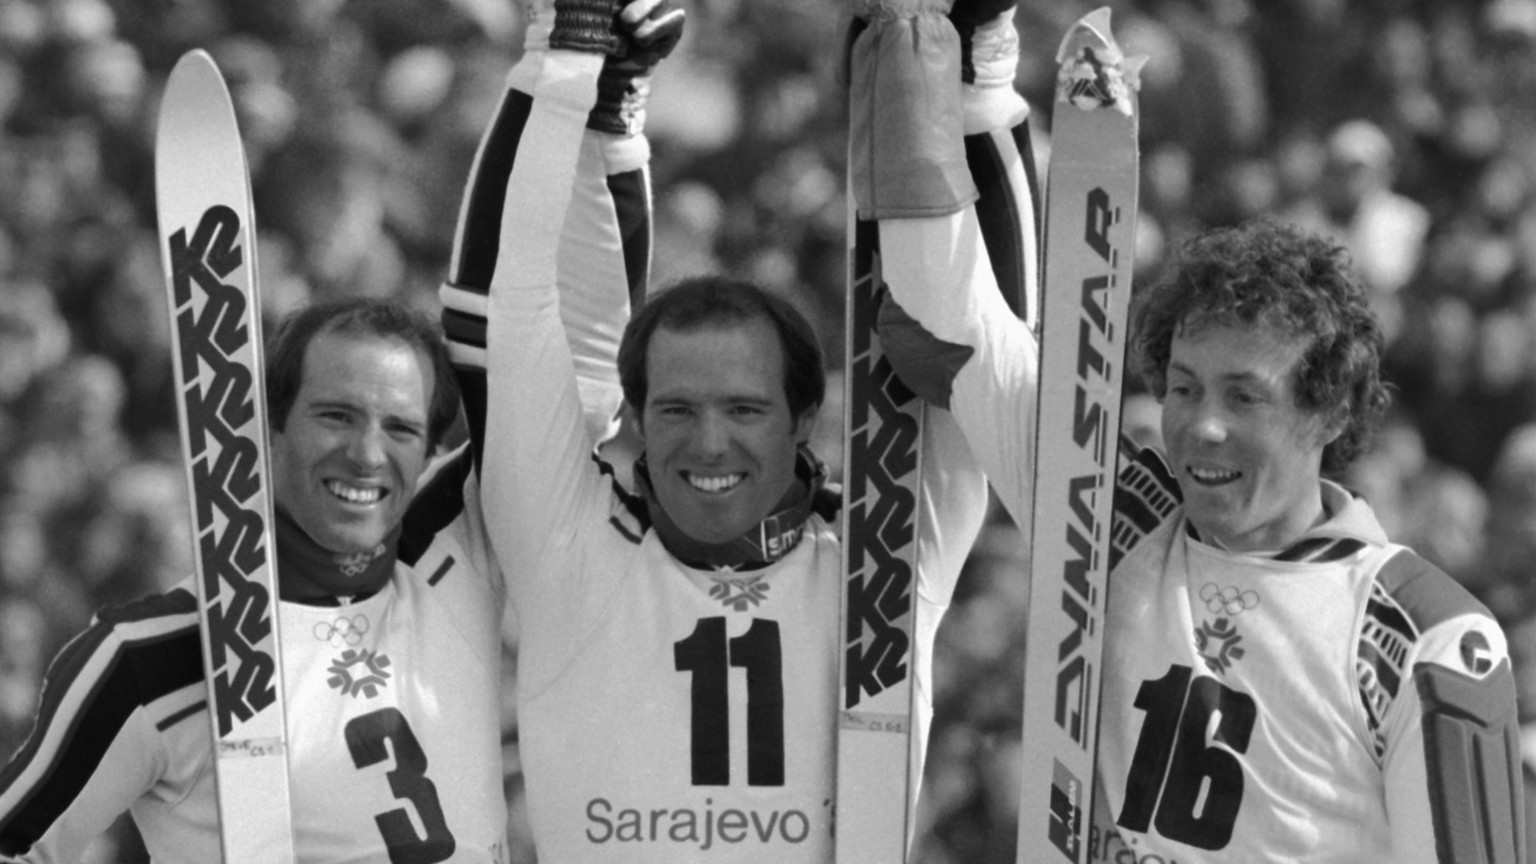 Phil Mahre (11) stands with his brother Steve (3) and Didier Bouvet (16) of France after the XIV Winter Olympics slalom on Mt. Bjelasnica in Sarajevo, Feb. 19, 1984. Americans Phil and Steve took top  ...